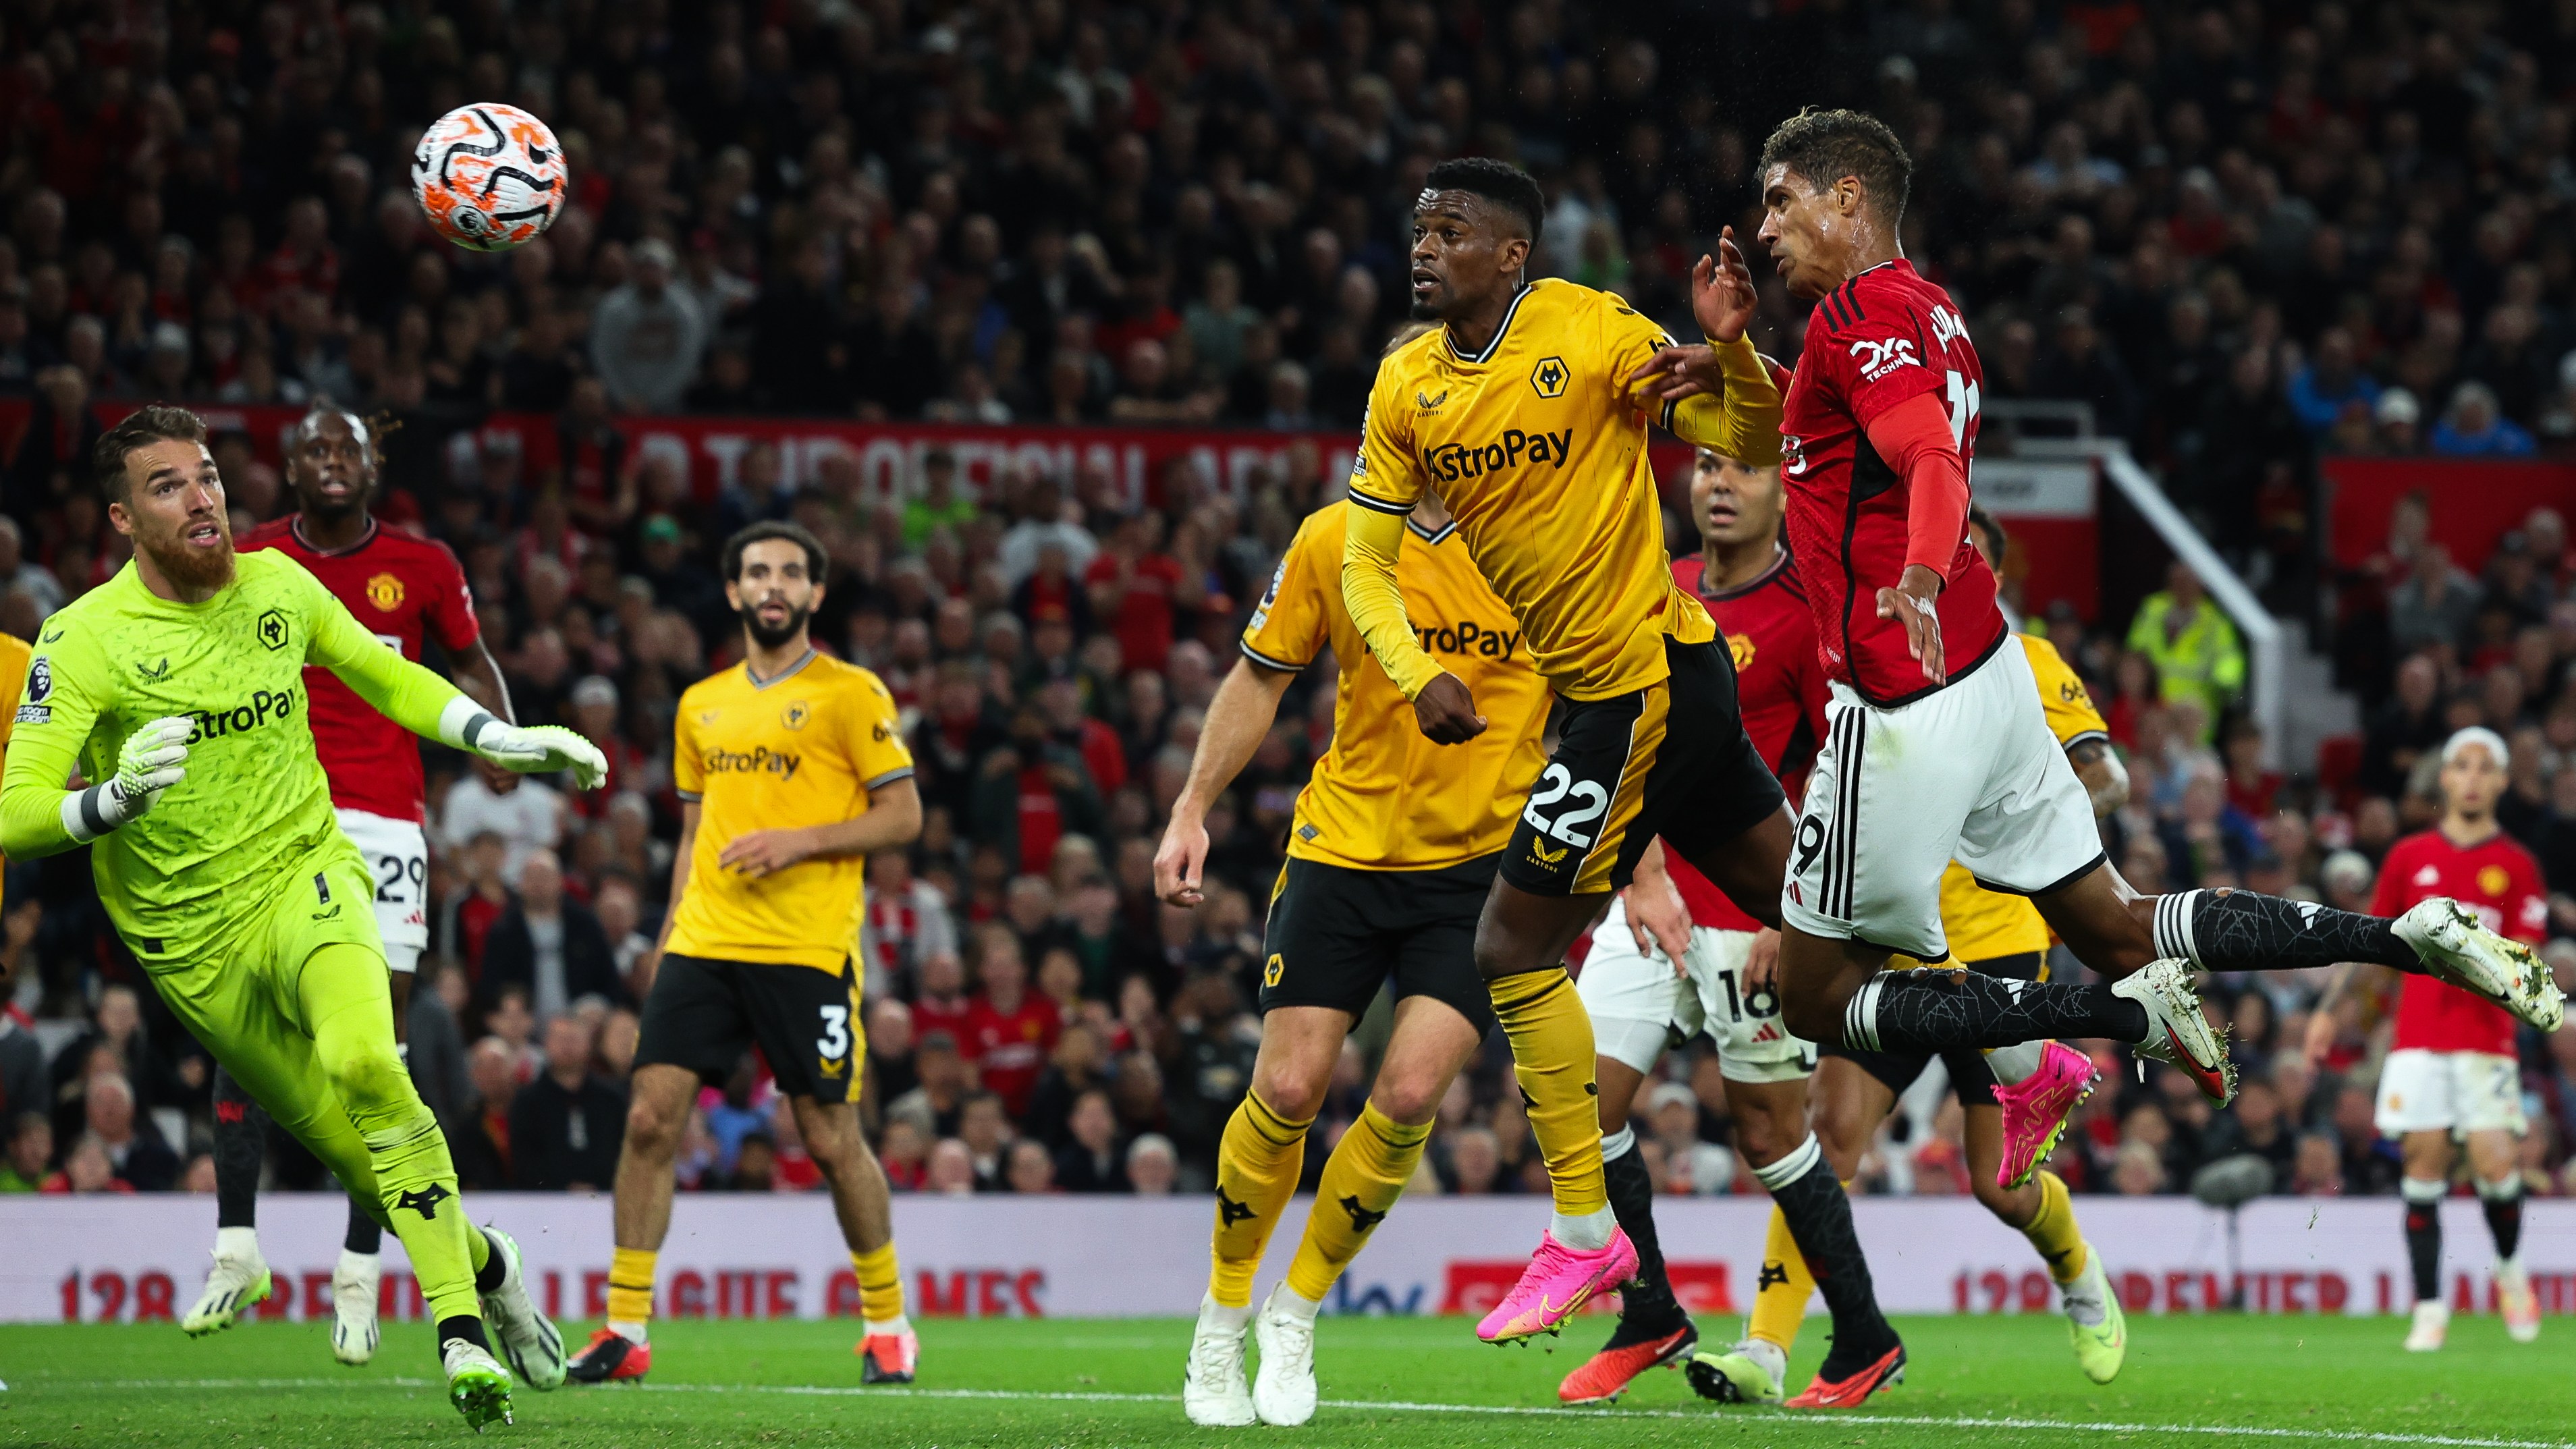 Raphaël Varane, pictured scoring against Wolverhampton Wanderers in August, showed moments of class for Manchester United. However, his three years at Old Trafford were also plagued by injuries